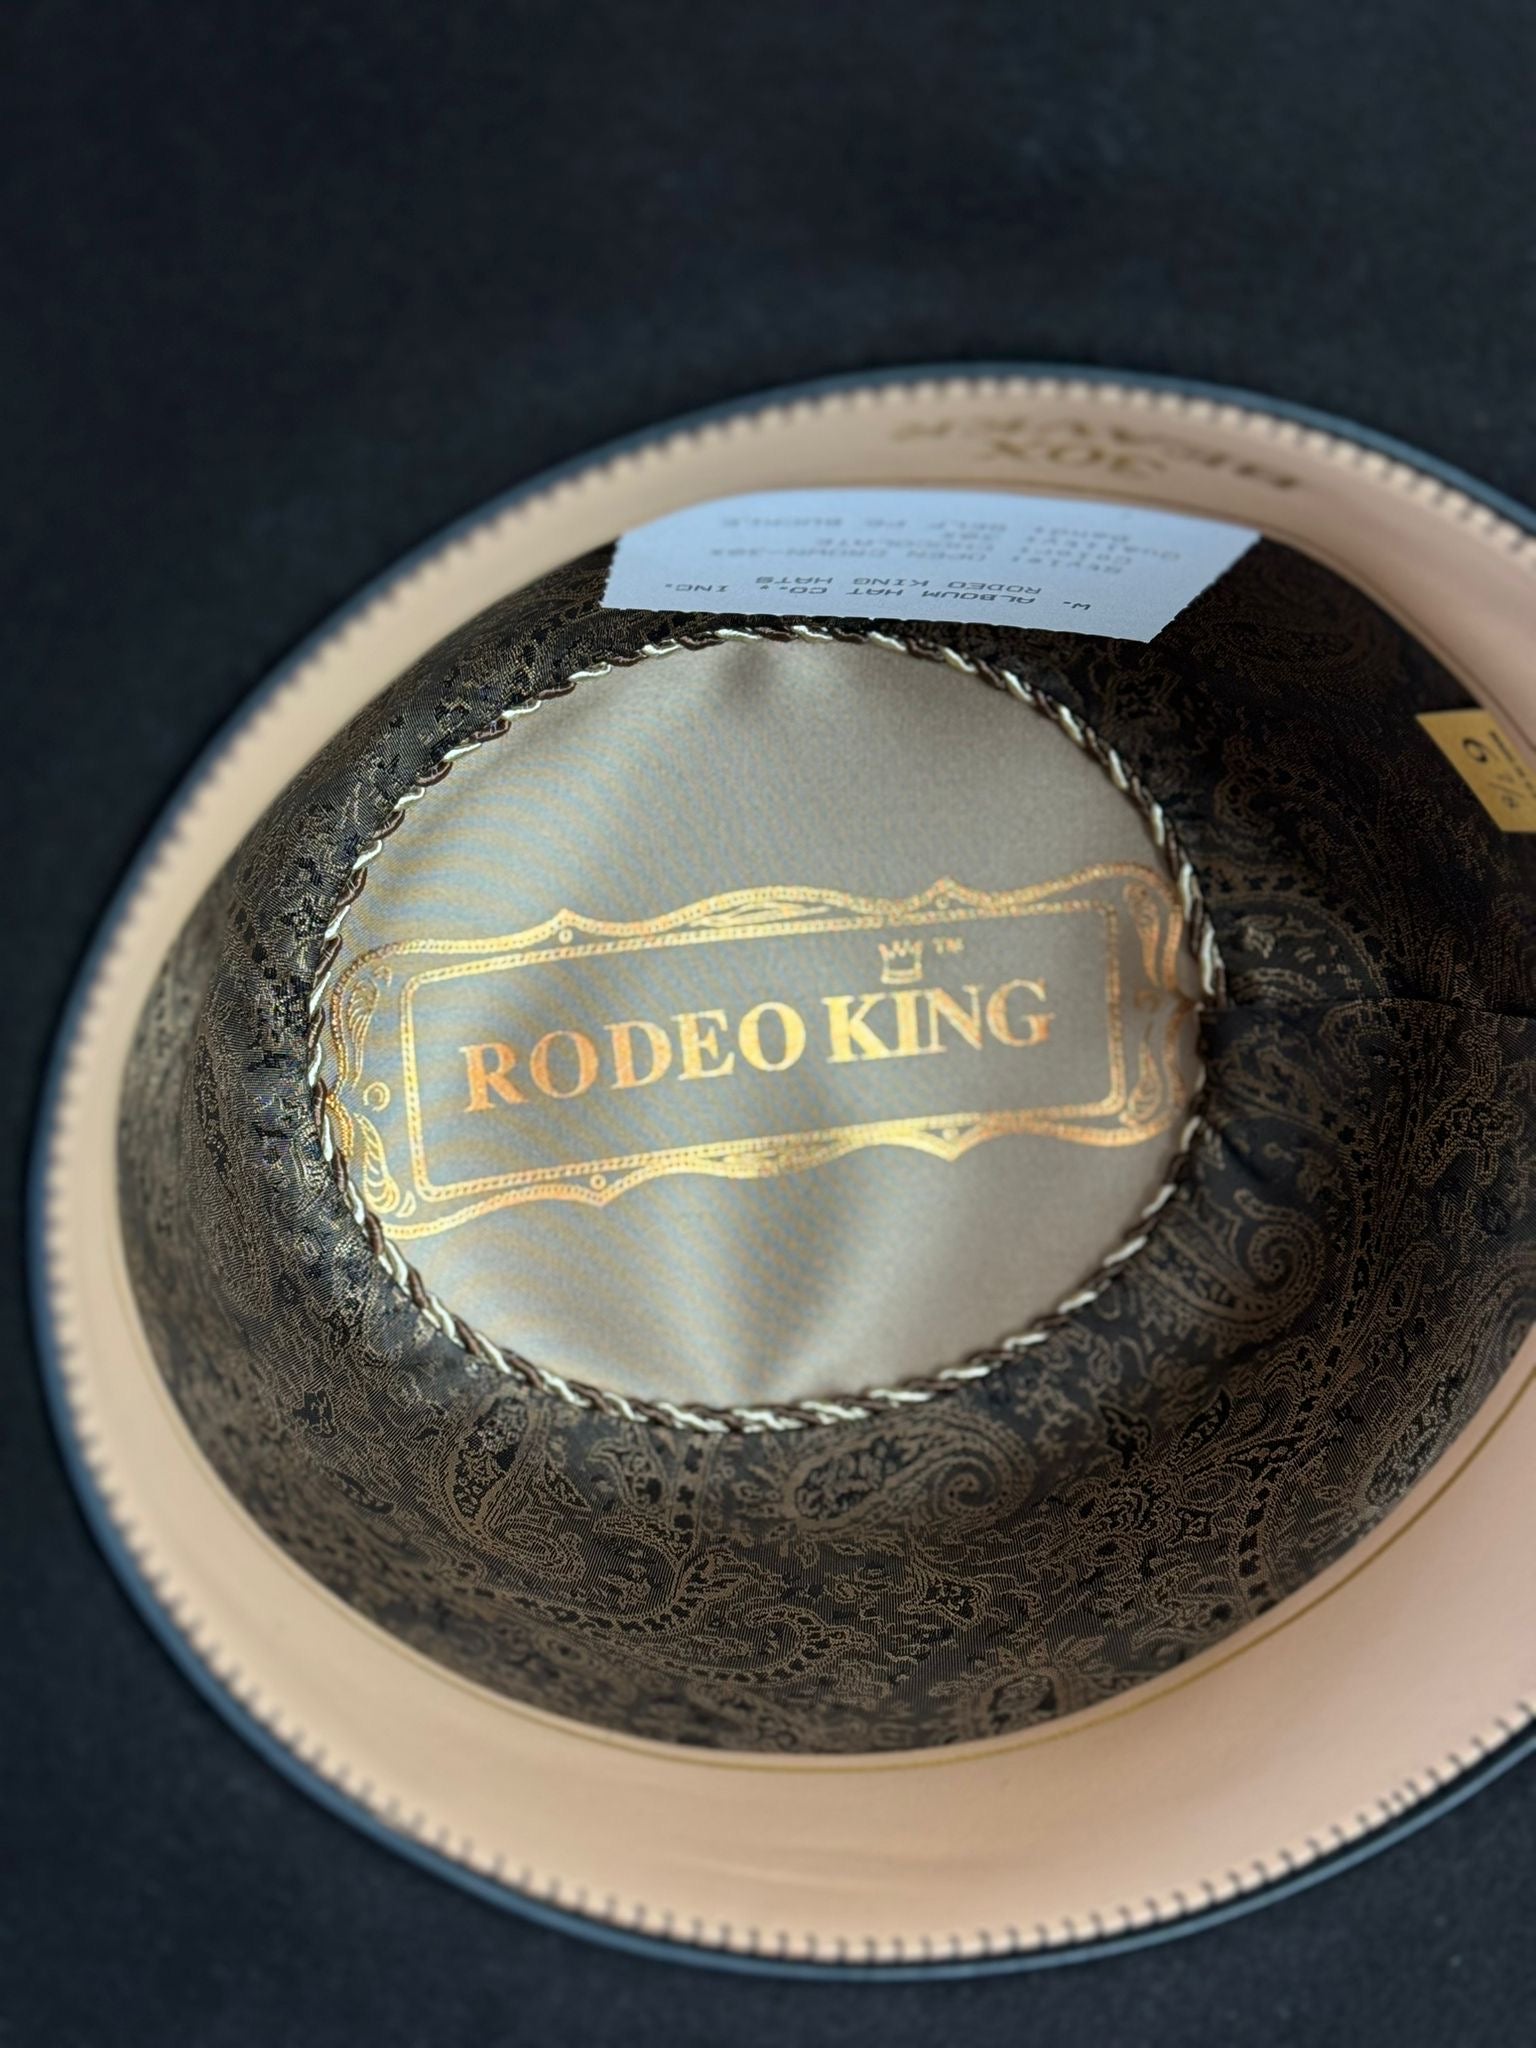 RODEO KING CHOCOLATE 30X OPEN CROWN